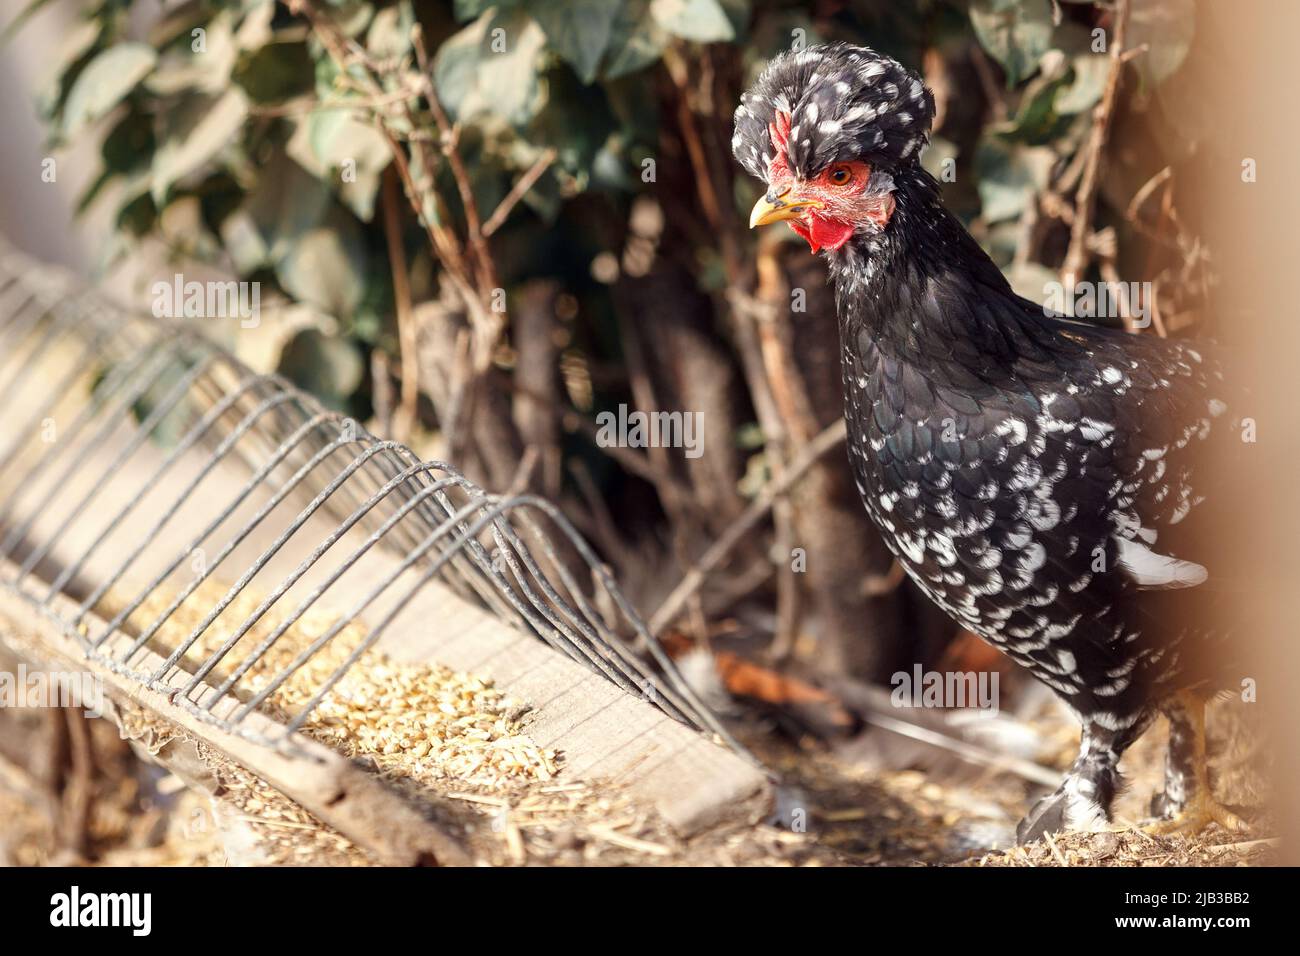 Black mini hen with a crest at the grain feeder Stock Photo